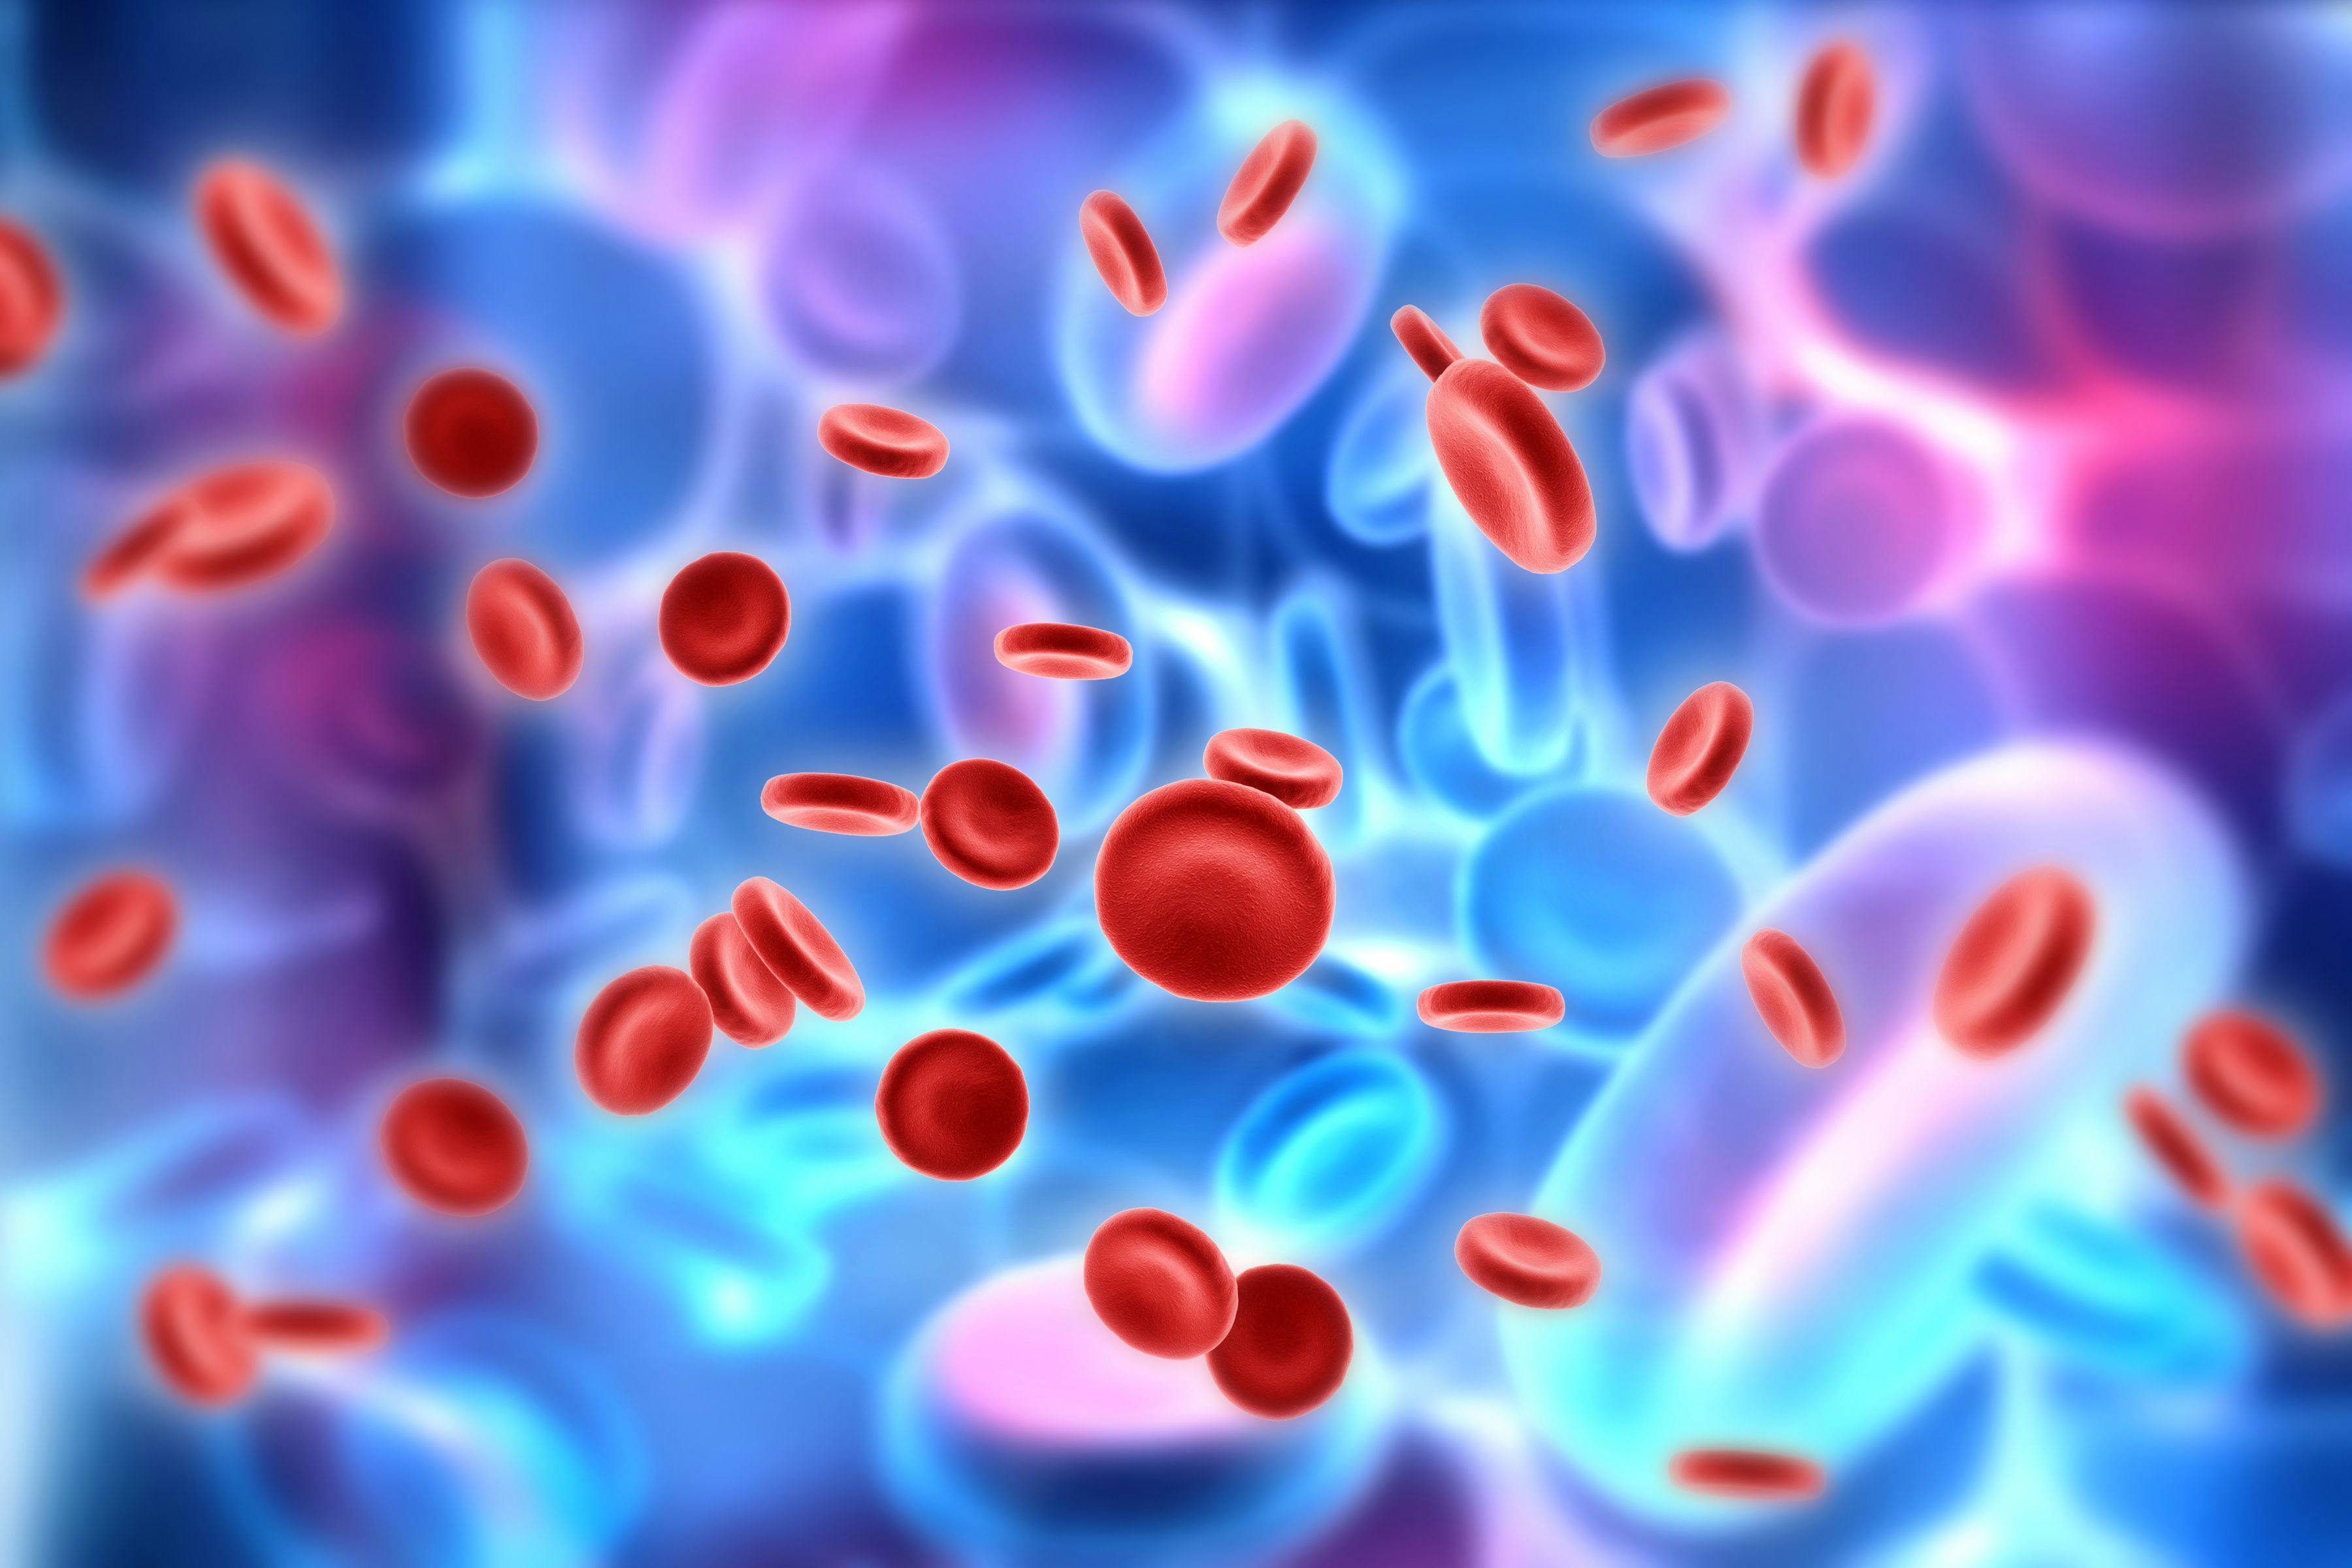 Streaming blood cells in abstract design | Image Credit: © zketch - www.stock.adobe.com